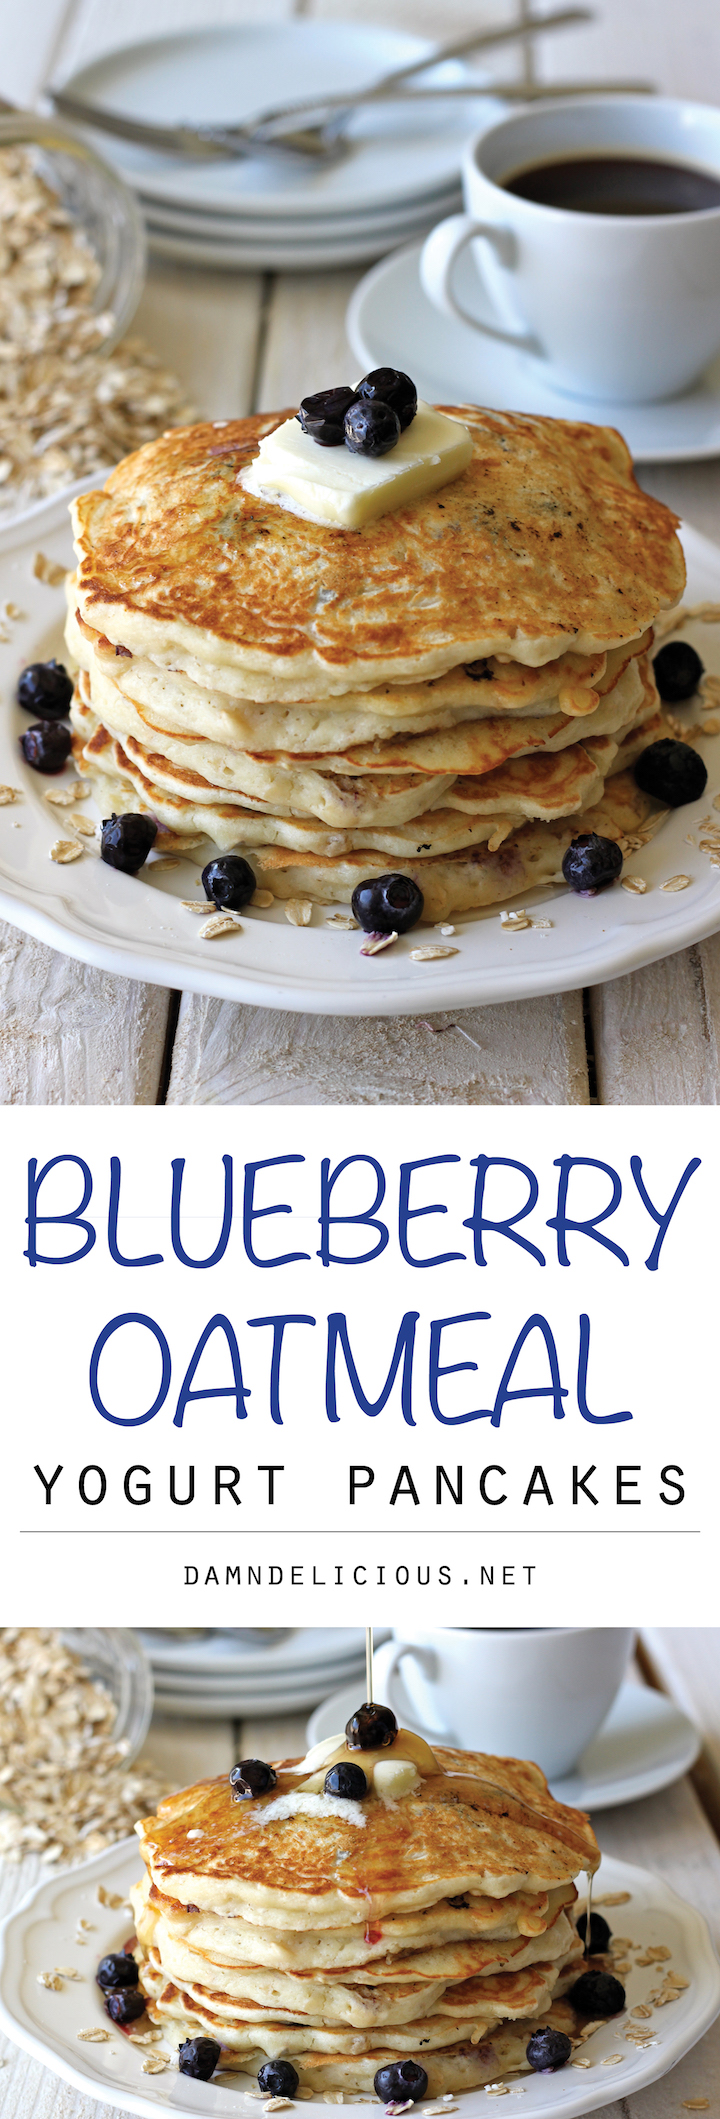 Blueberry Oatmeal Yogurt Pancakes - Start your mornings off right with these light and healthy pancakes loaded with juicy blueberries!